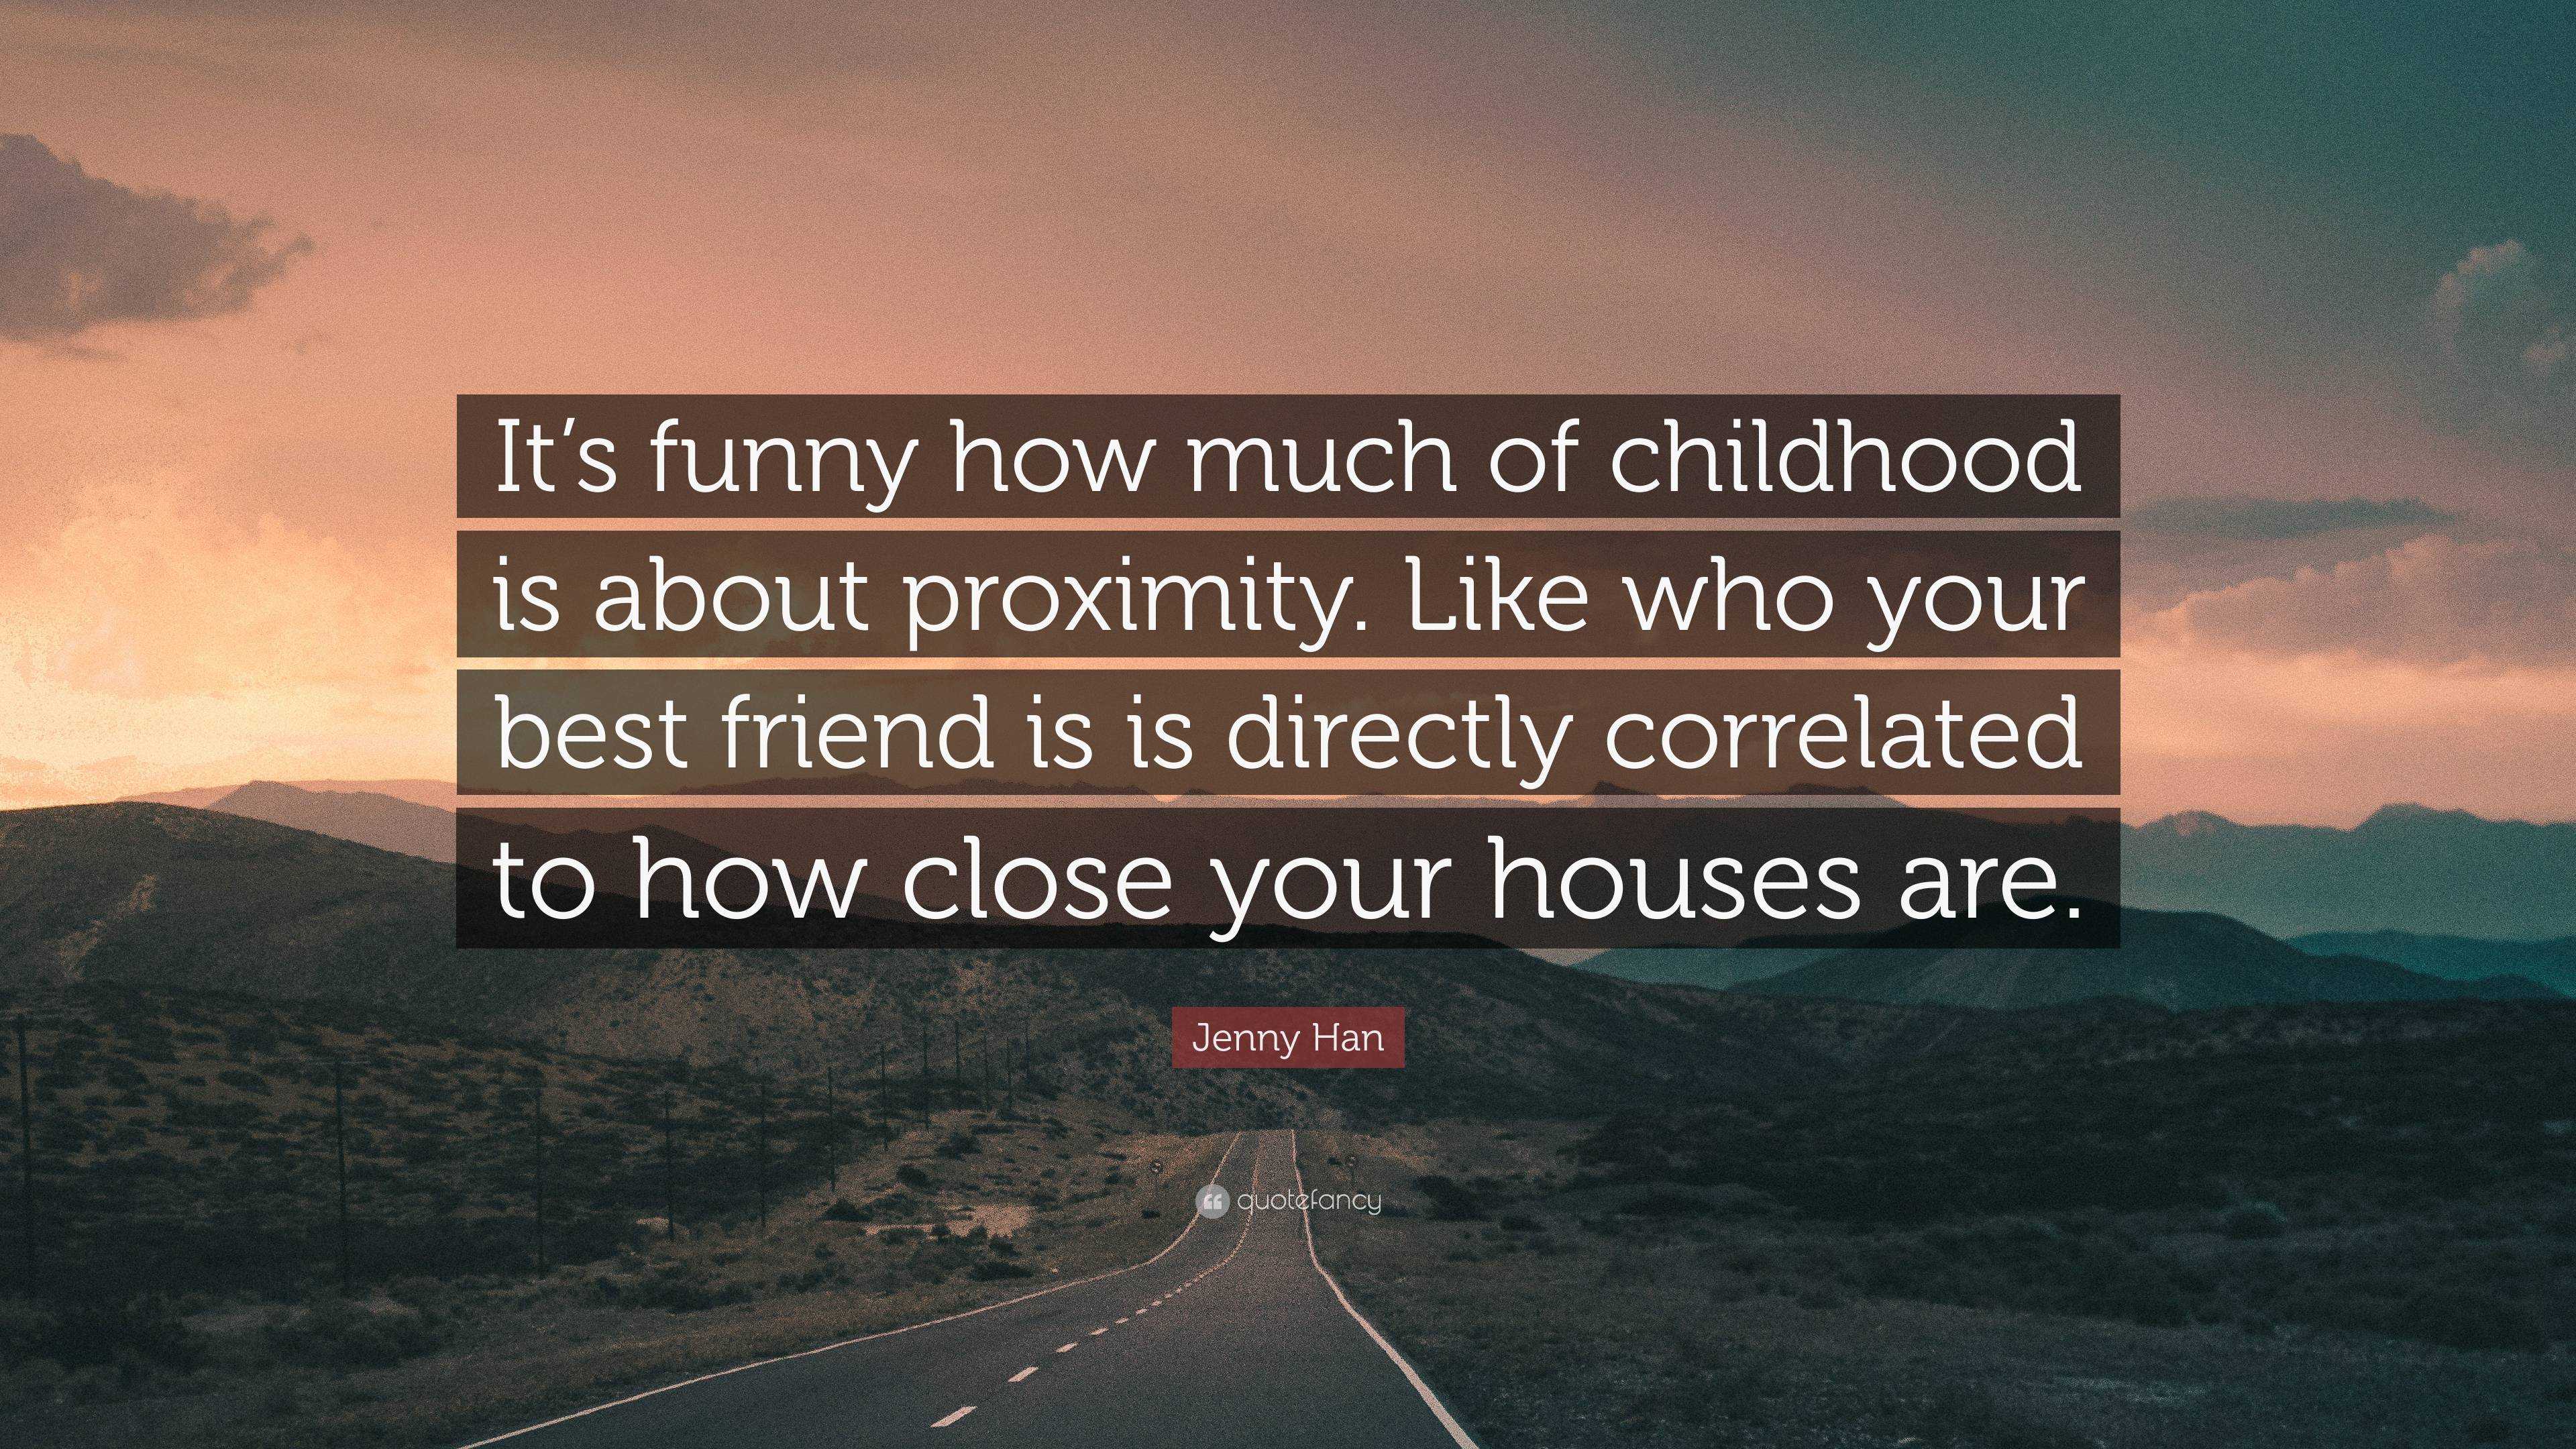 Jenny Han Quote: “It's funny how much of childhood is about proximity. Like  who your best friend is is directly correlated to how close yo...”